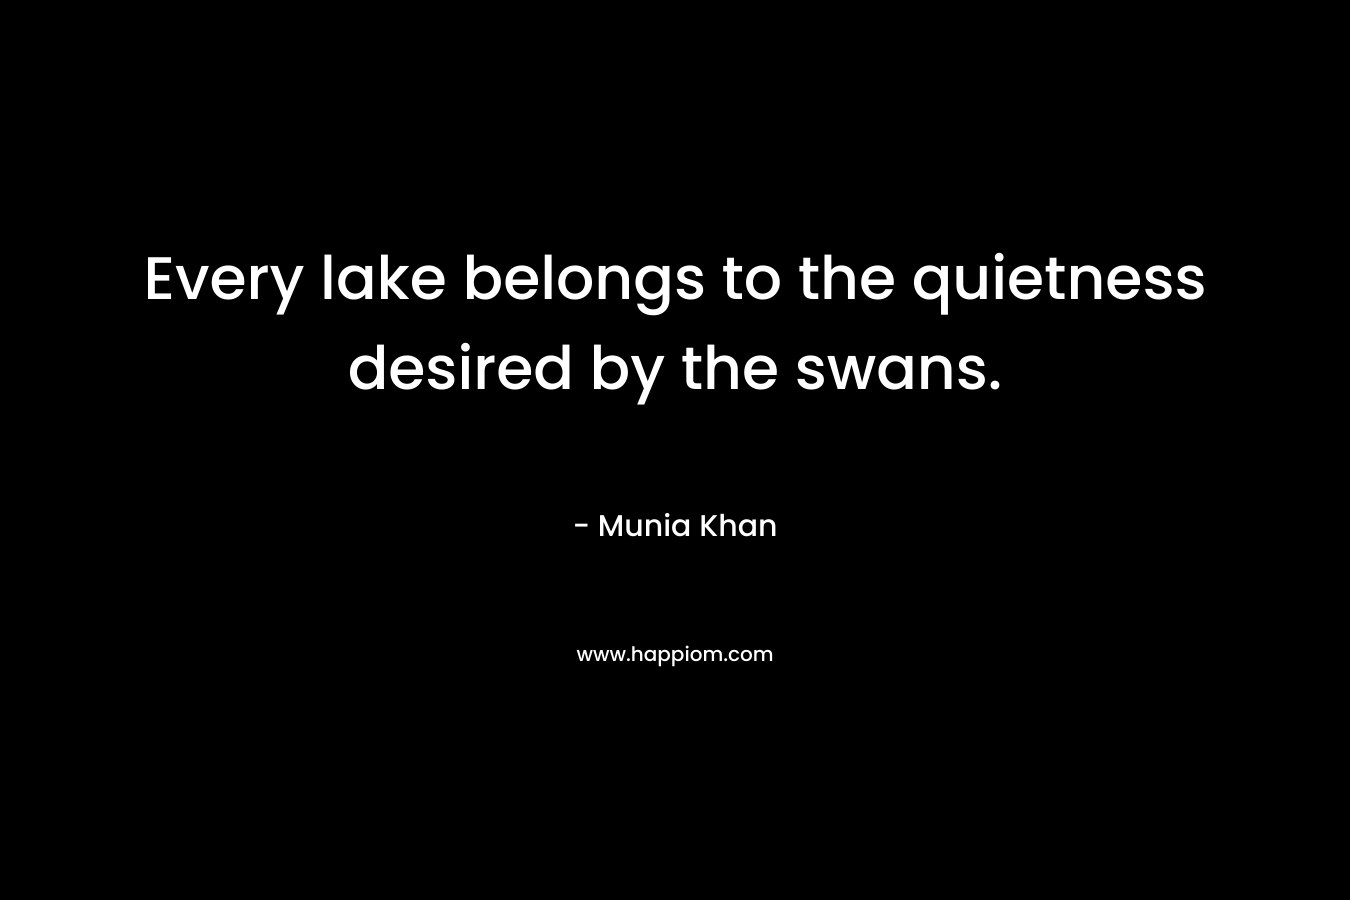 Every lake belongs to the quietness desired by the swans.